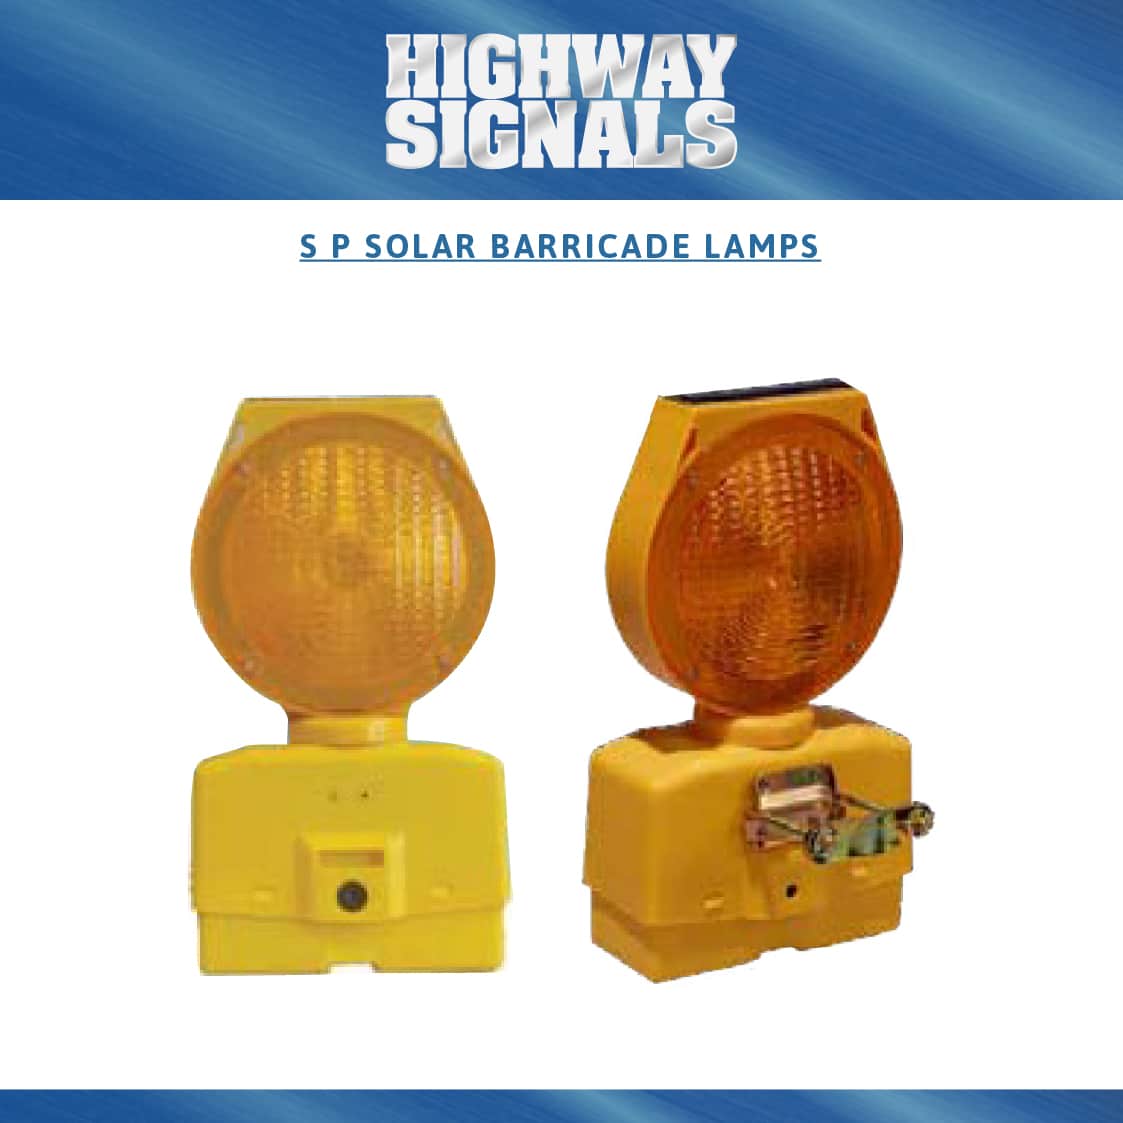 SIGNAL 7503 AMBER ROAD BARRICADE SAFETY LIGHT REPLACEMENT 2PC LENSE LENZ LOT 4 